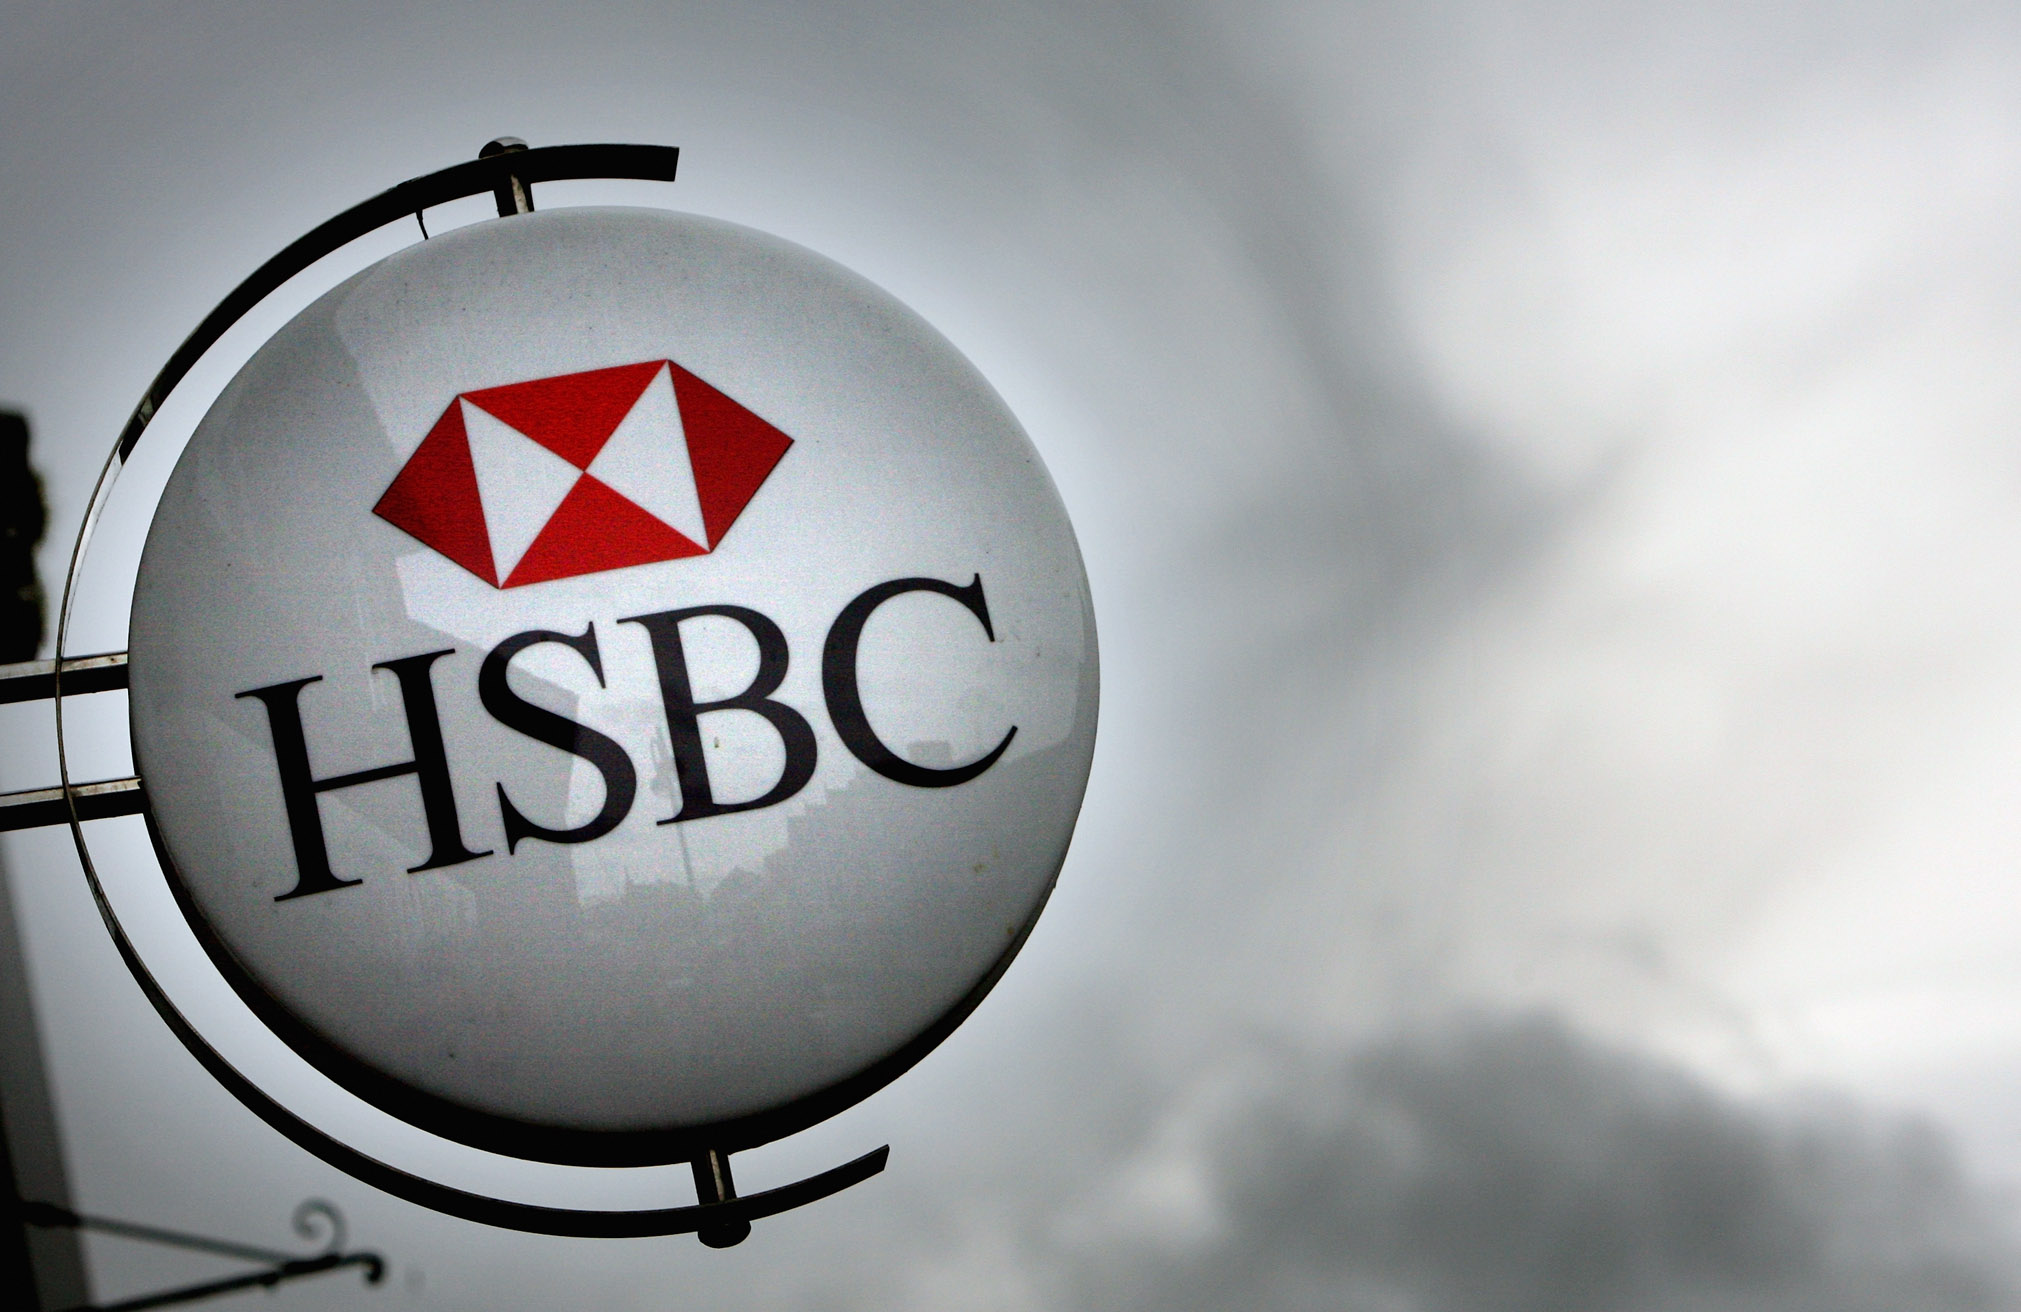 The HSBC logo is displayed in Street, England, on March 3, 2008. (Matt Cardy—Getty Images)